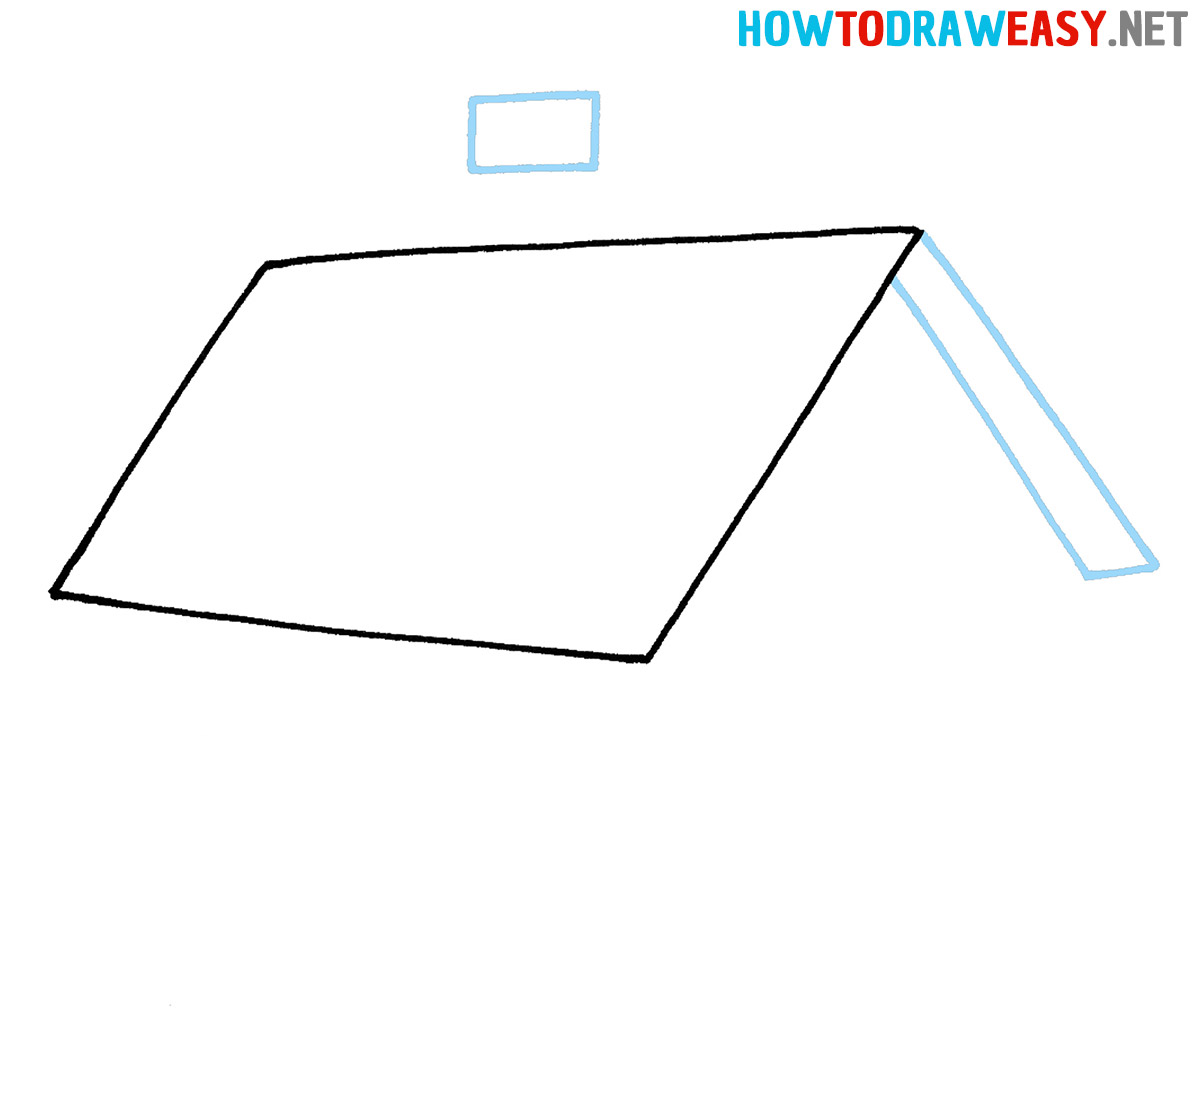 Step by Step How to Draw a House